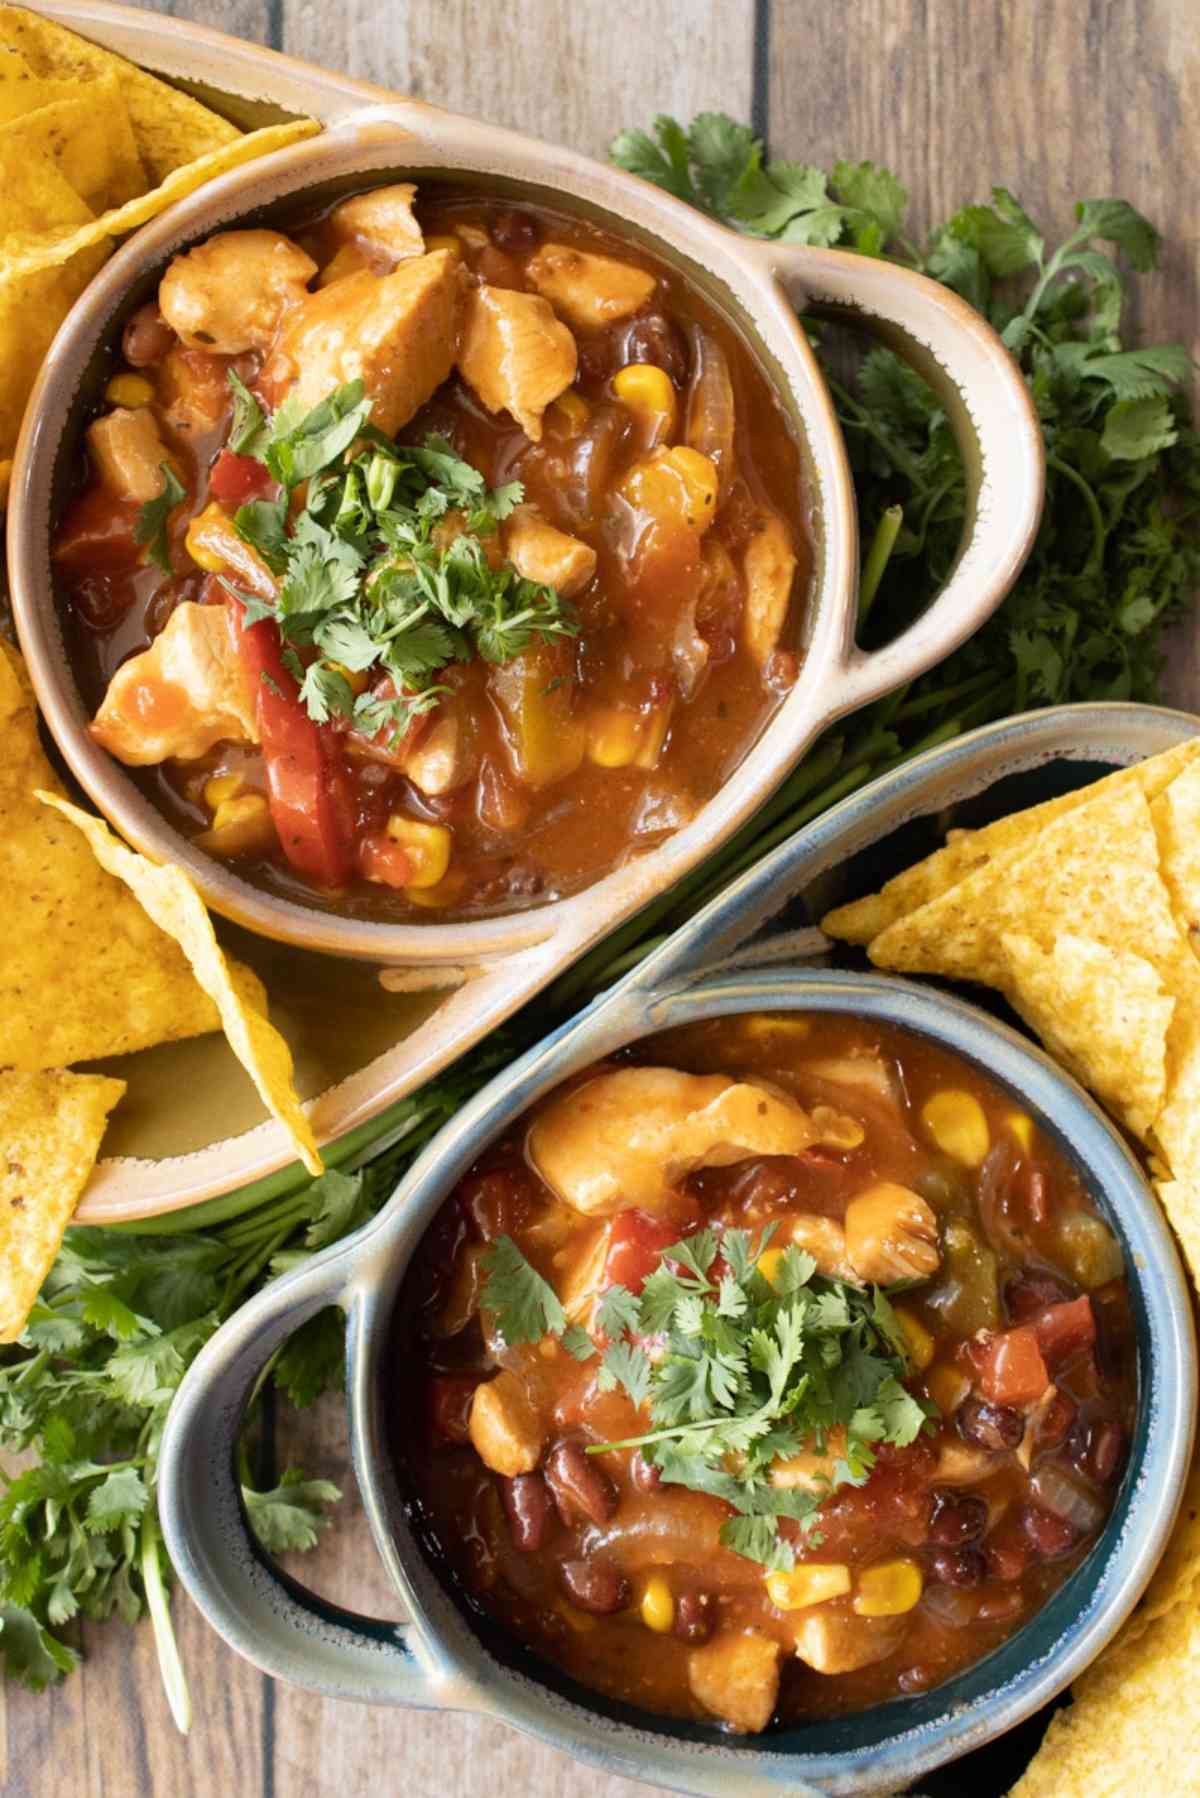 Serve this tasty recipe with chips and cilantro!